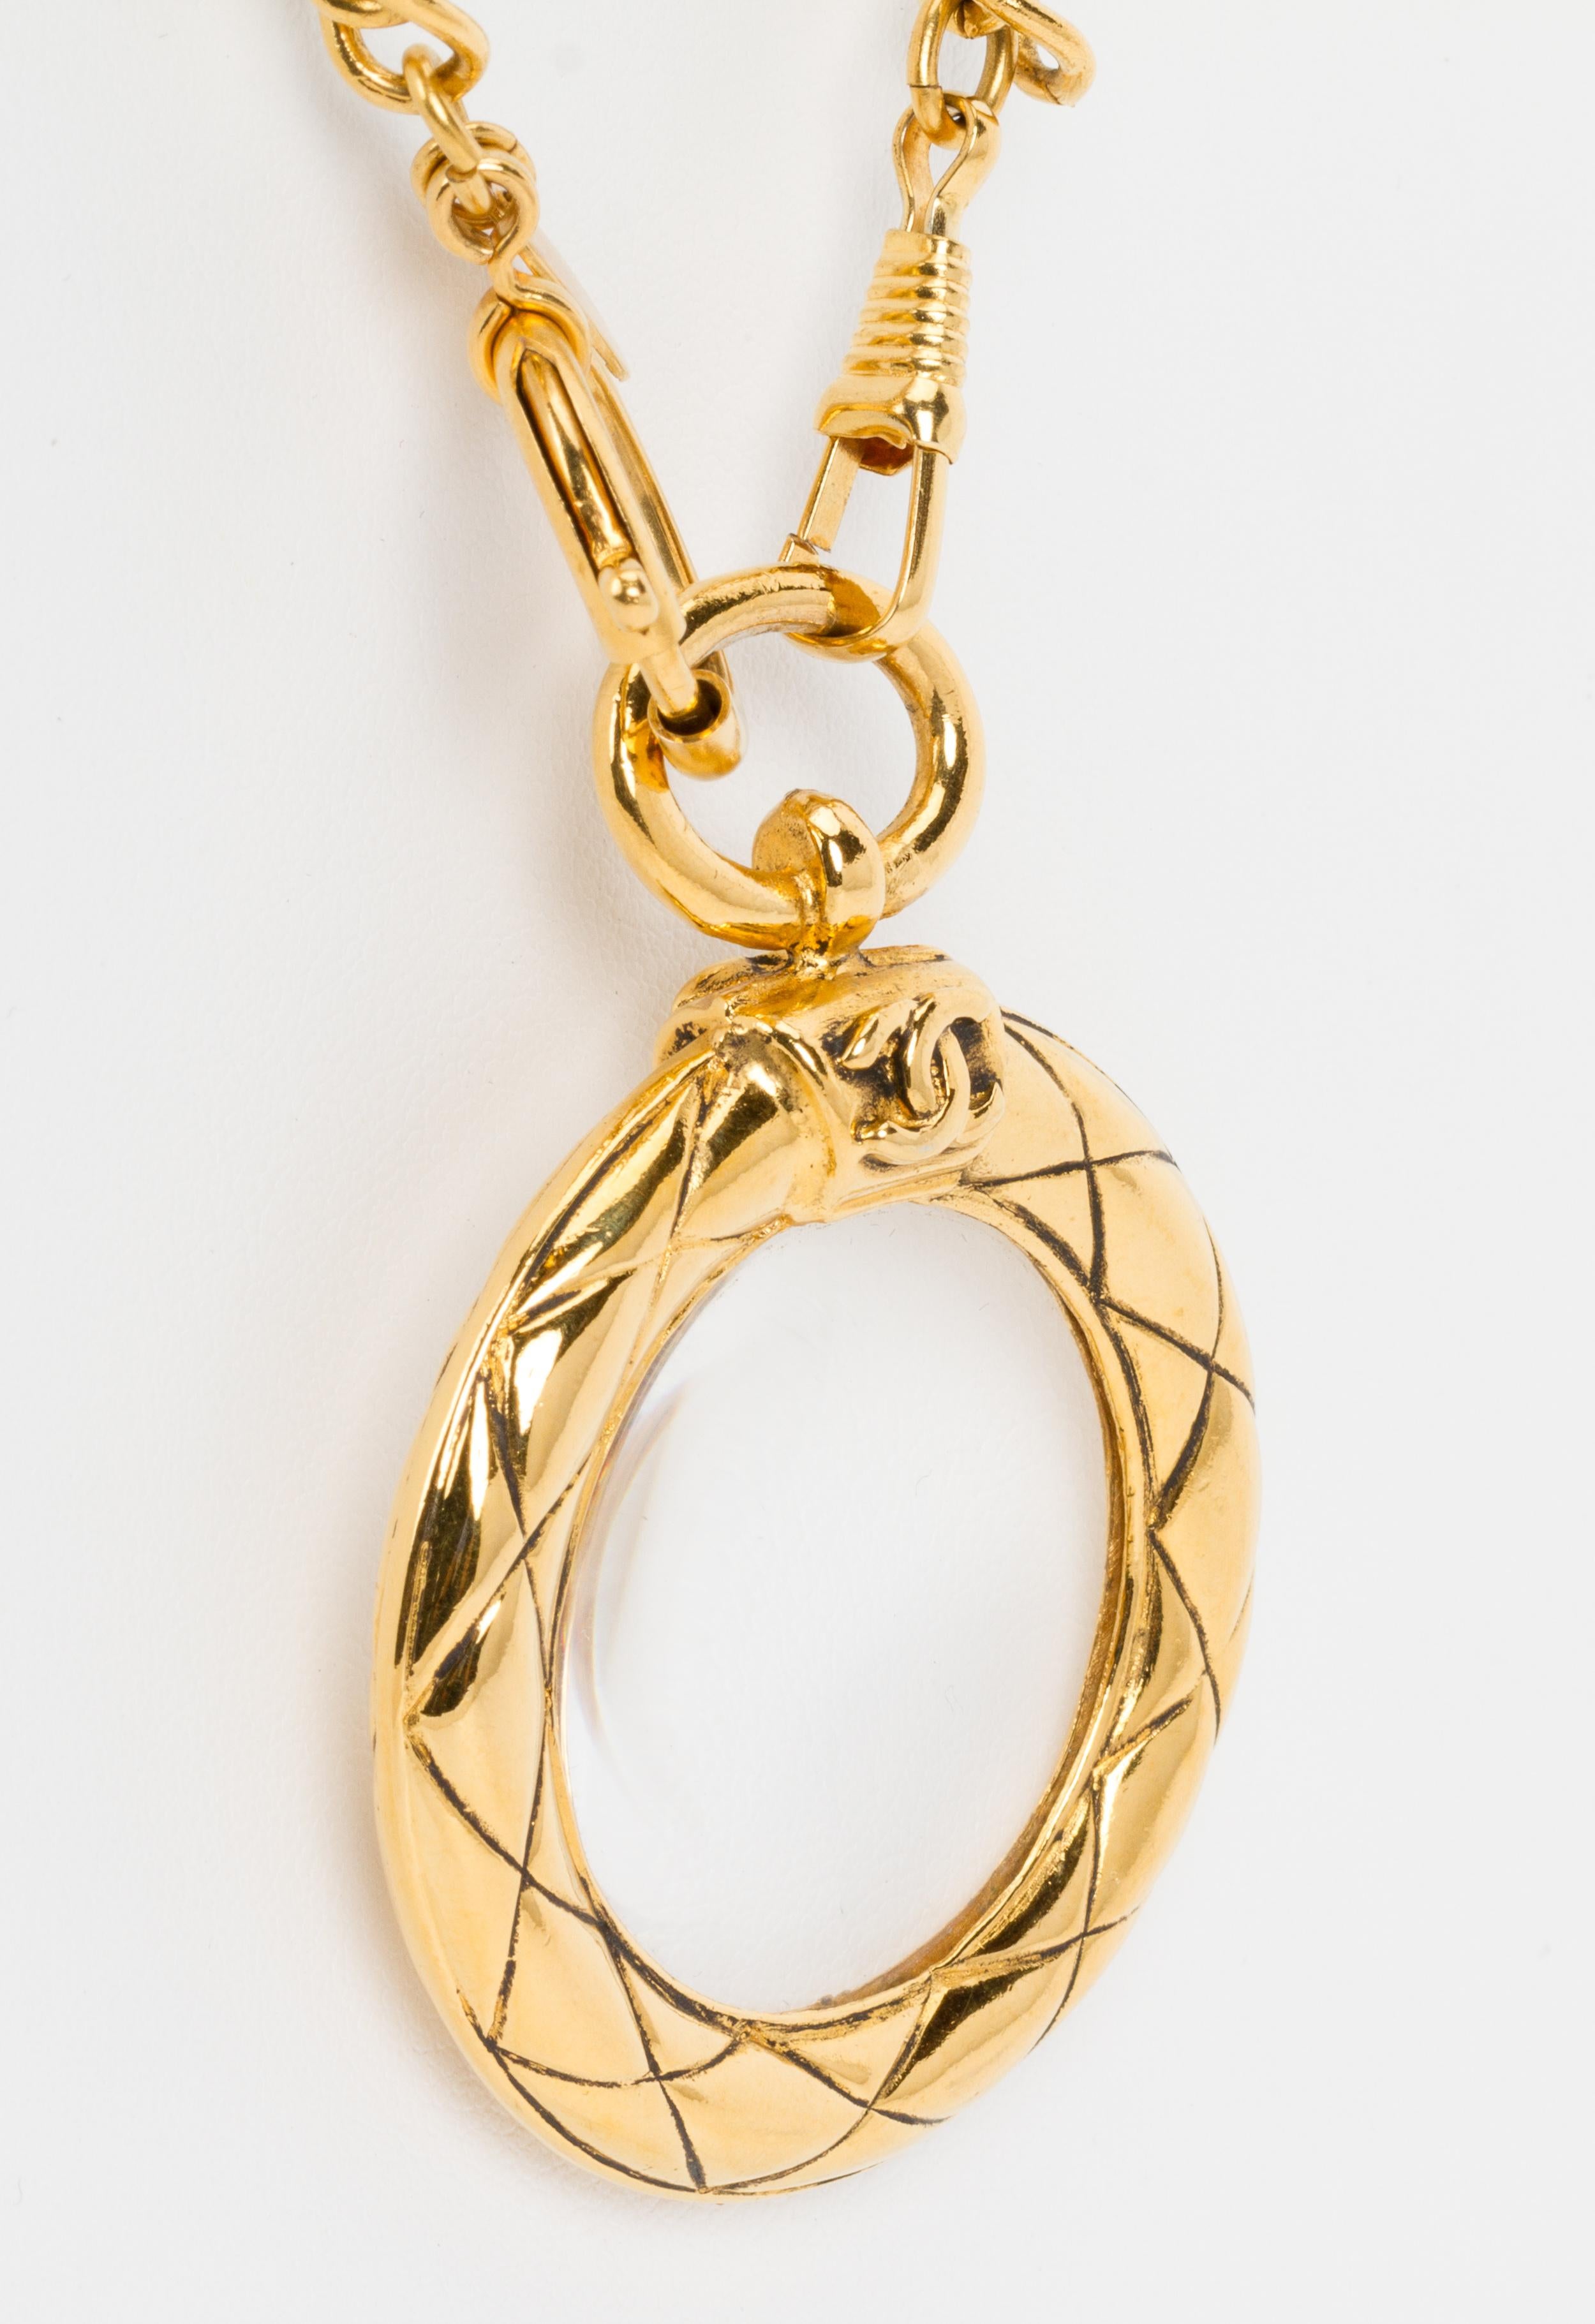 Women's 1980s Chanel Quilted Magnifier Necklace For Sale